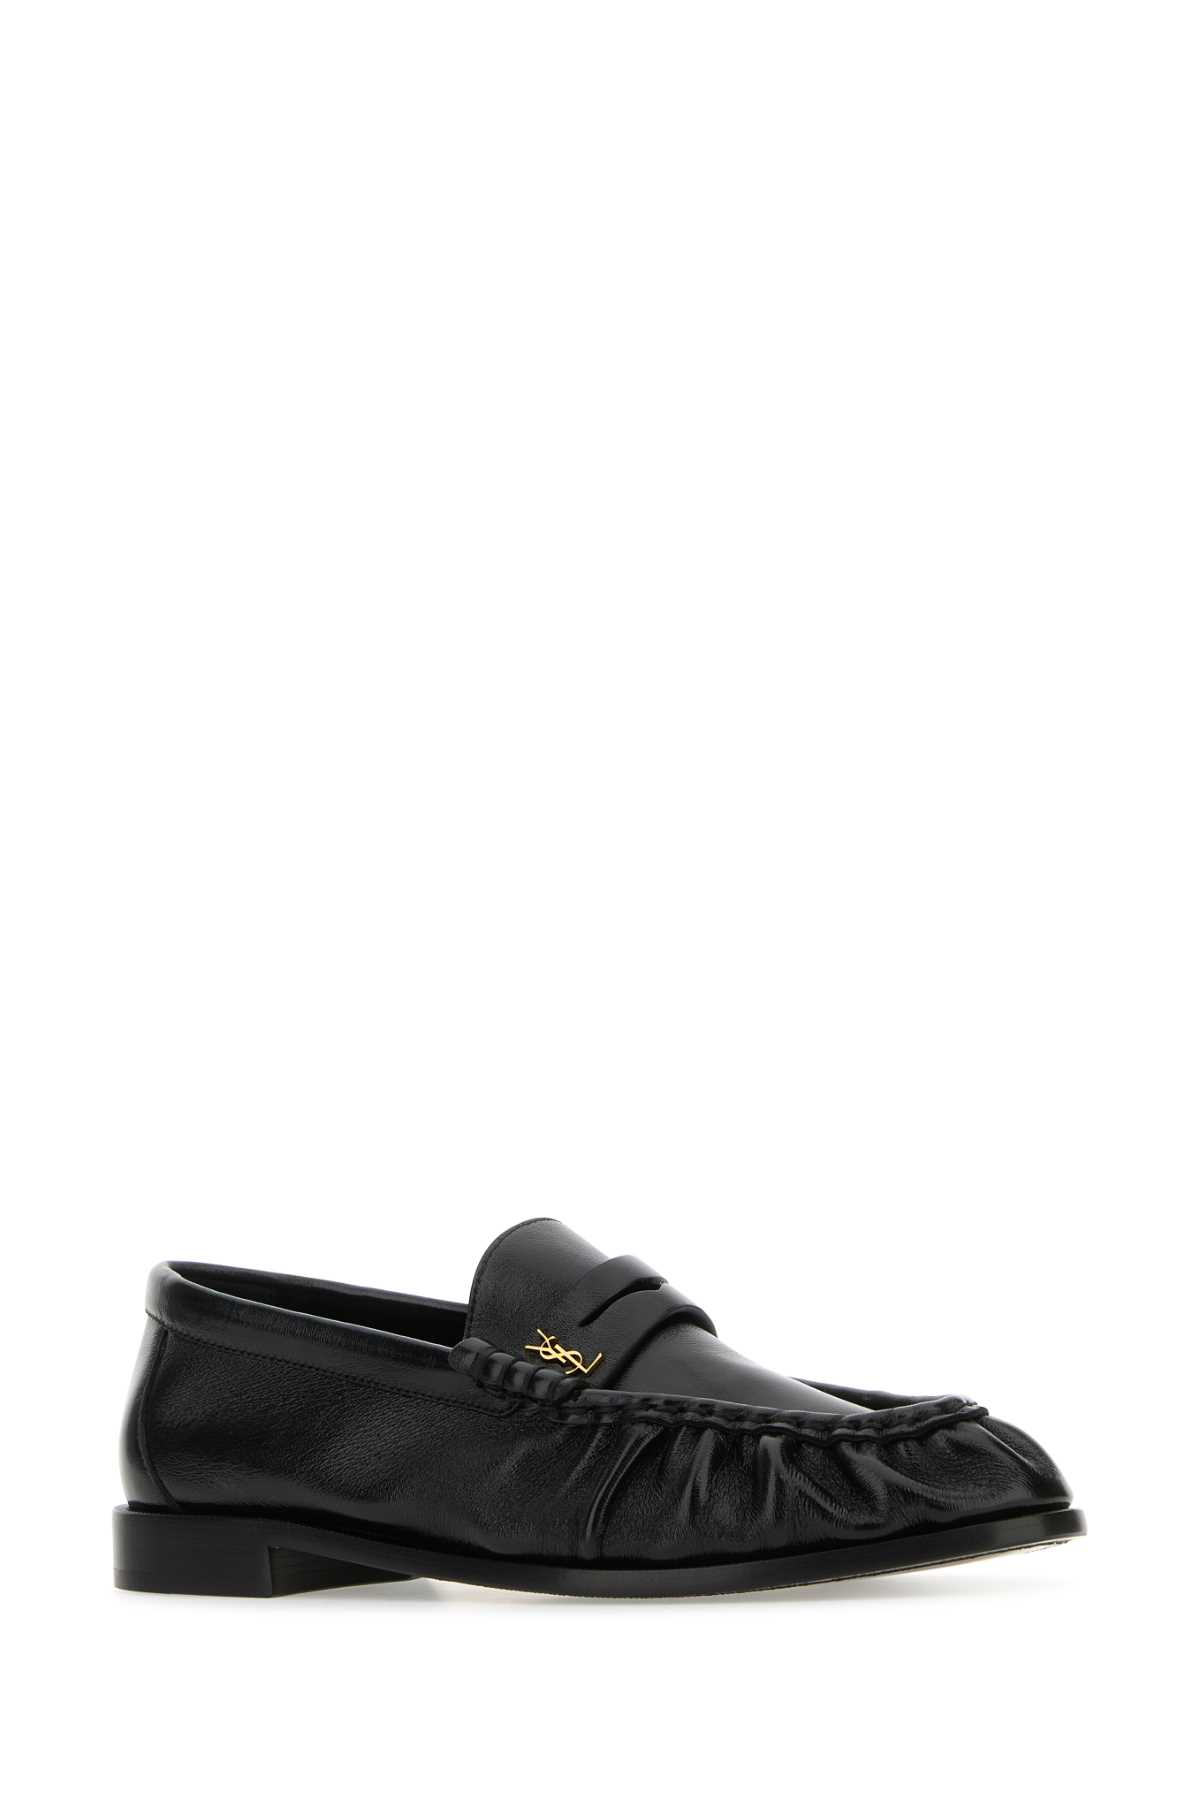 Saint Laurent Black Leather Le Loafer Loafers In Nero